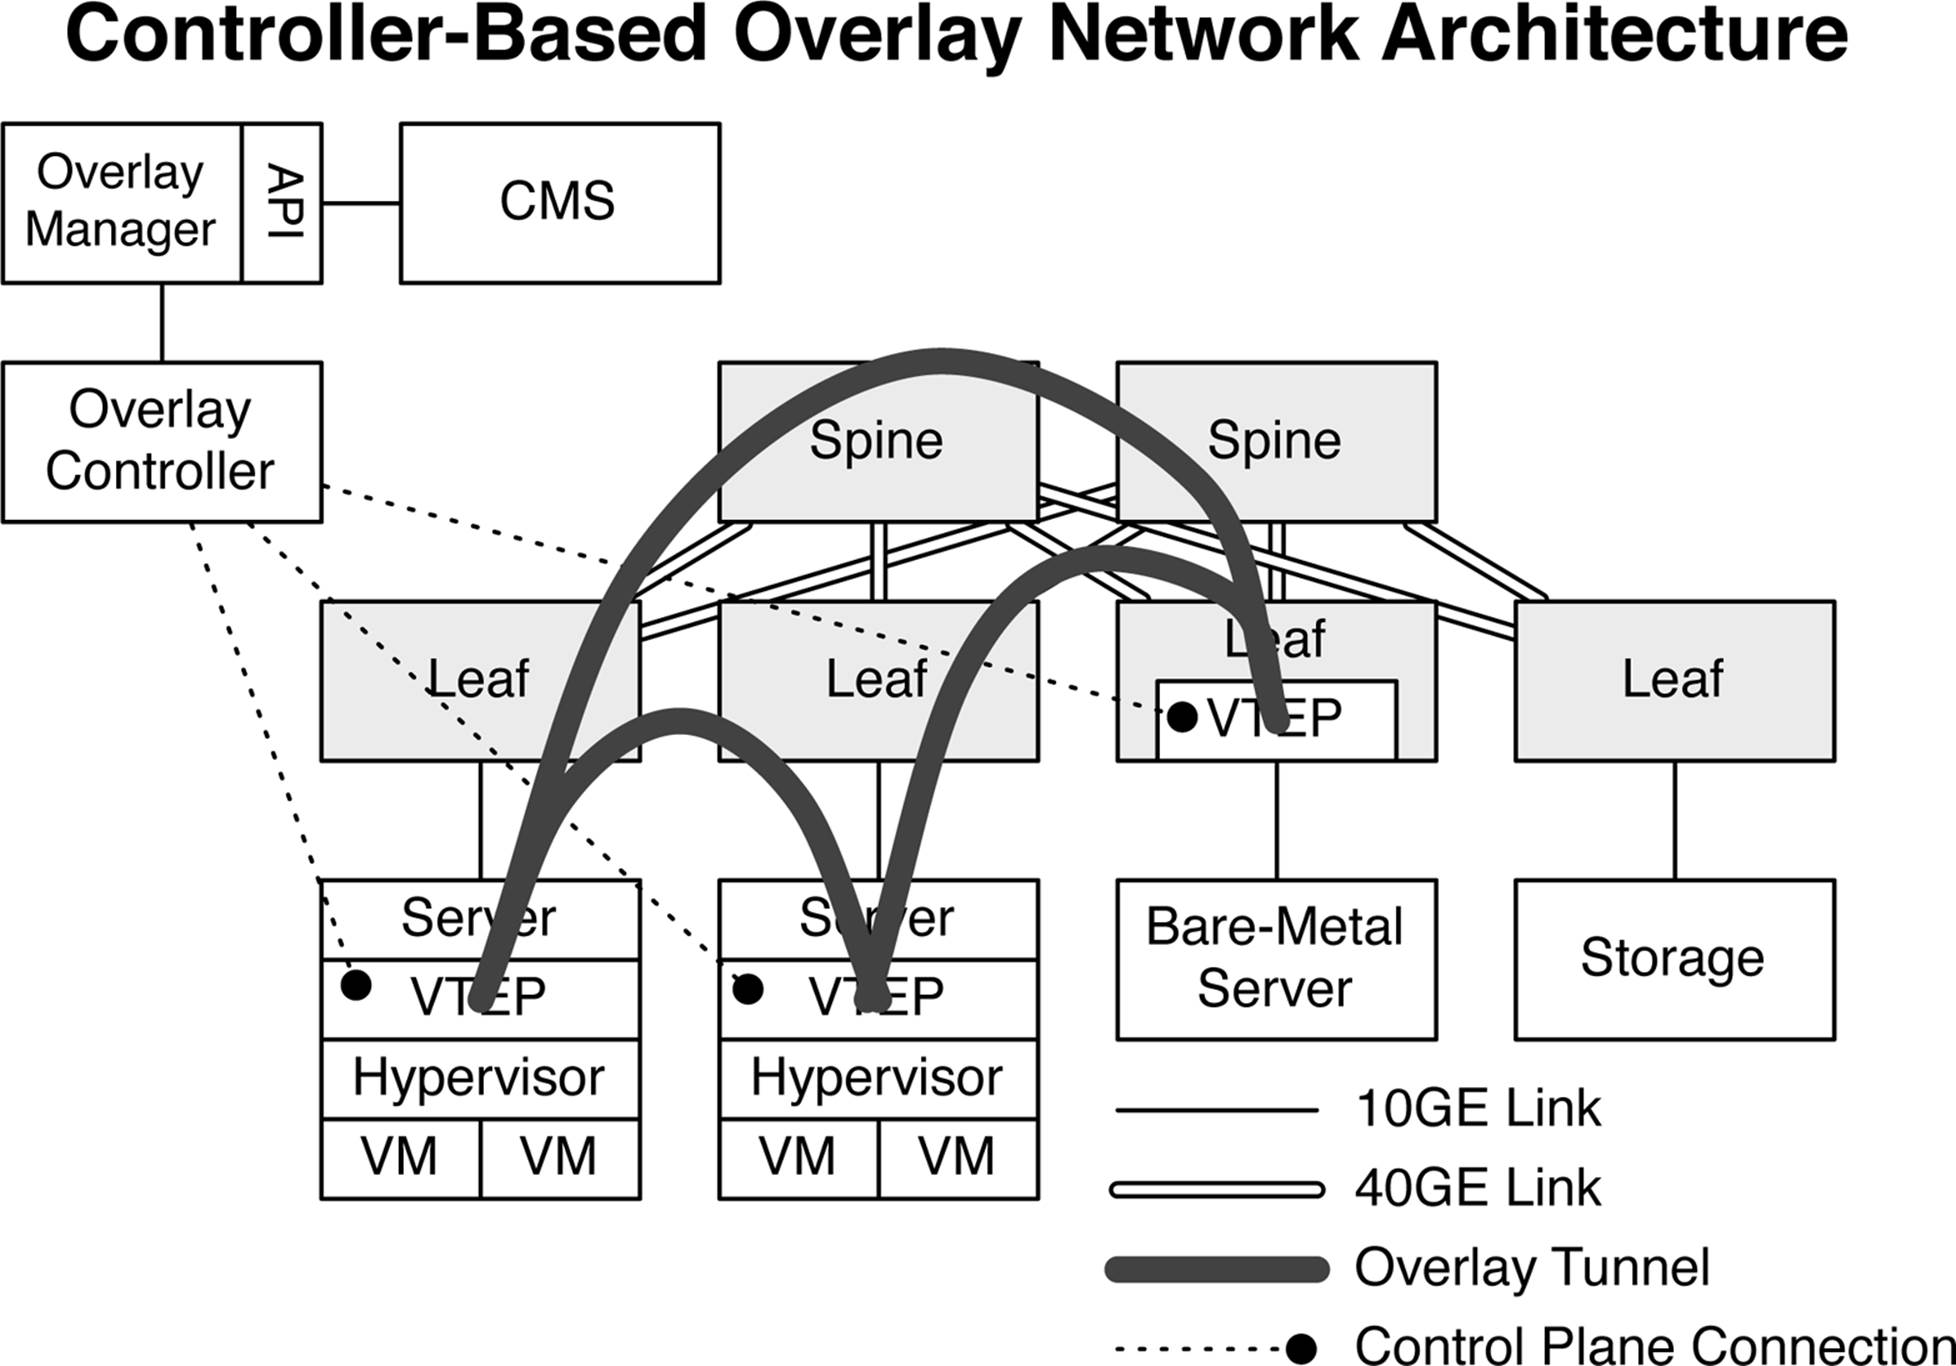 Controller-based overlay network architecture